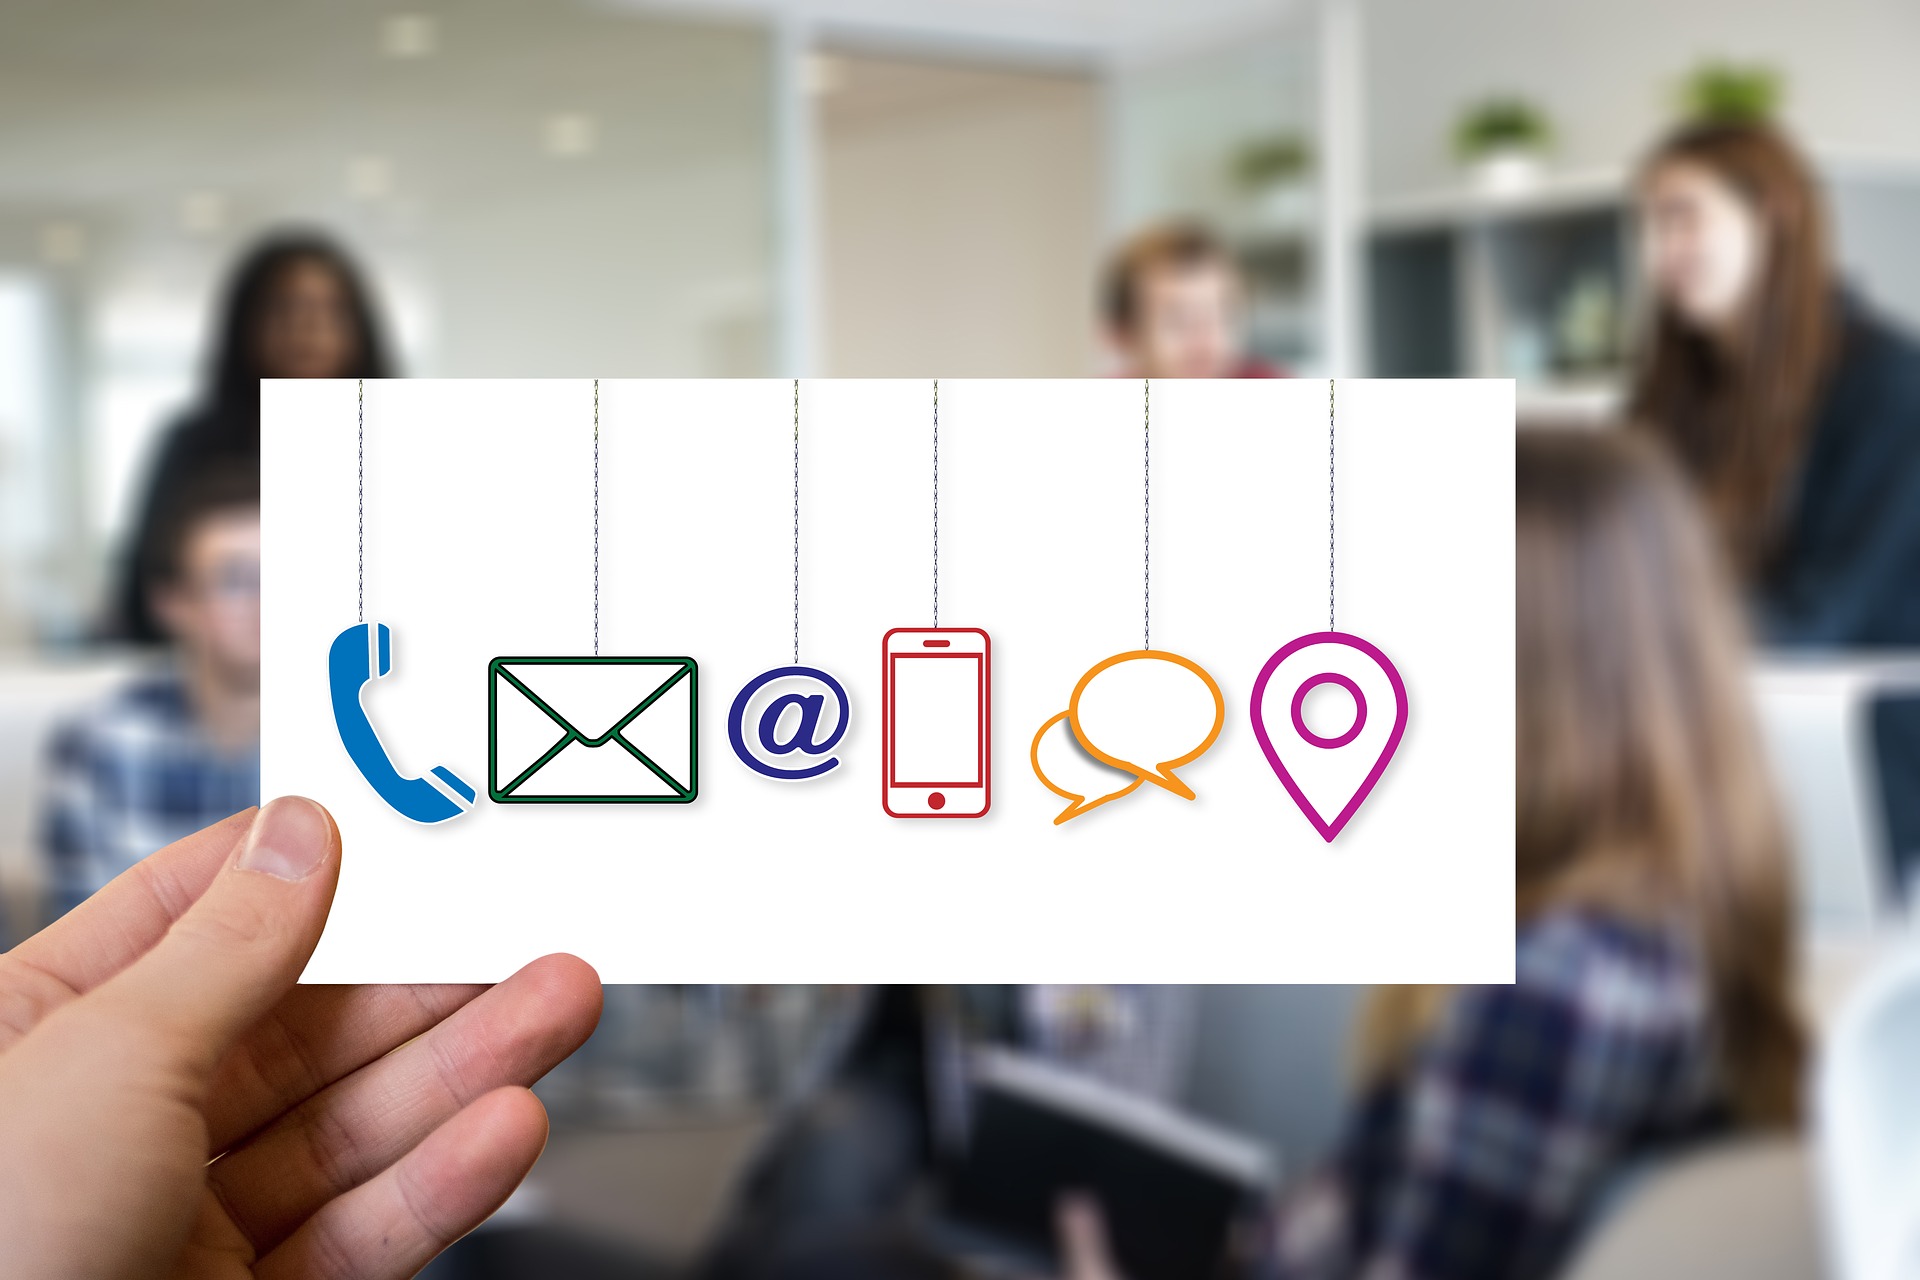 Mobile, email, telephone and social media icons